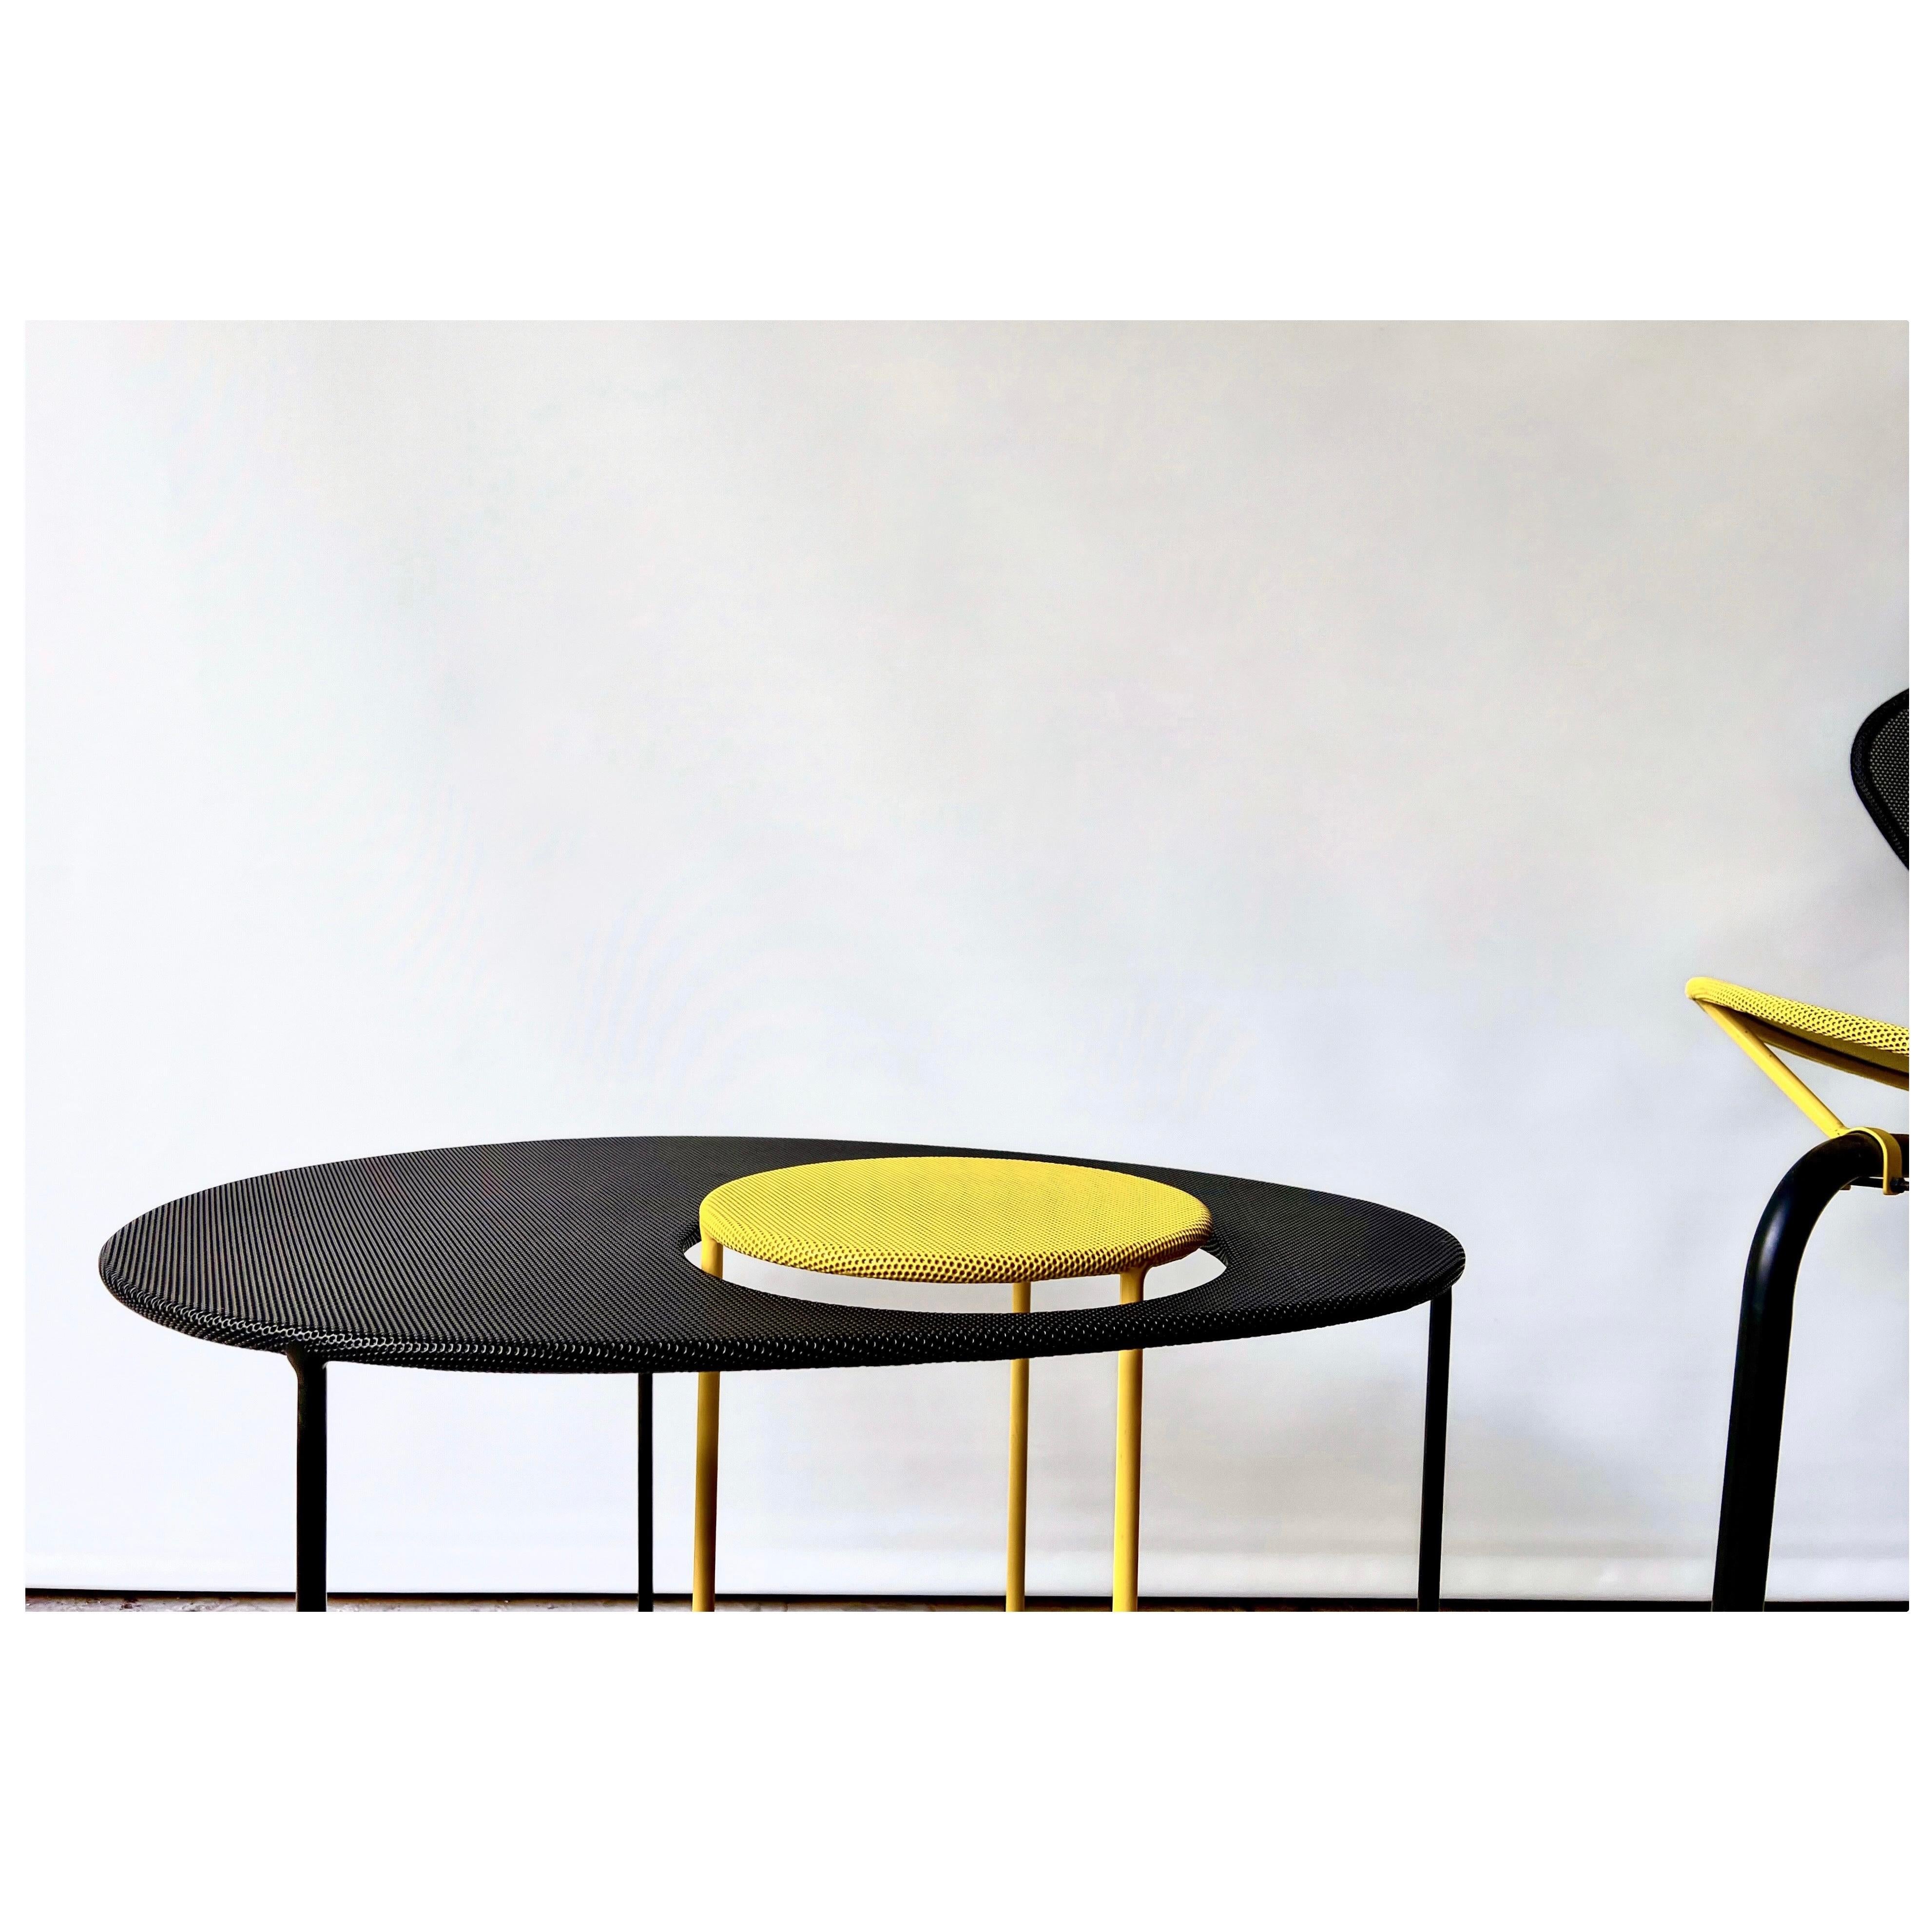 Mathieu Mategot Kangaroo side tables, set of two in black & yellow, for Gubi For Sale 4